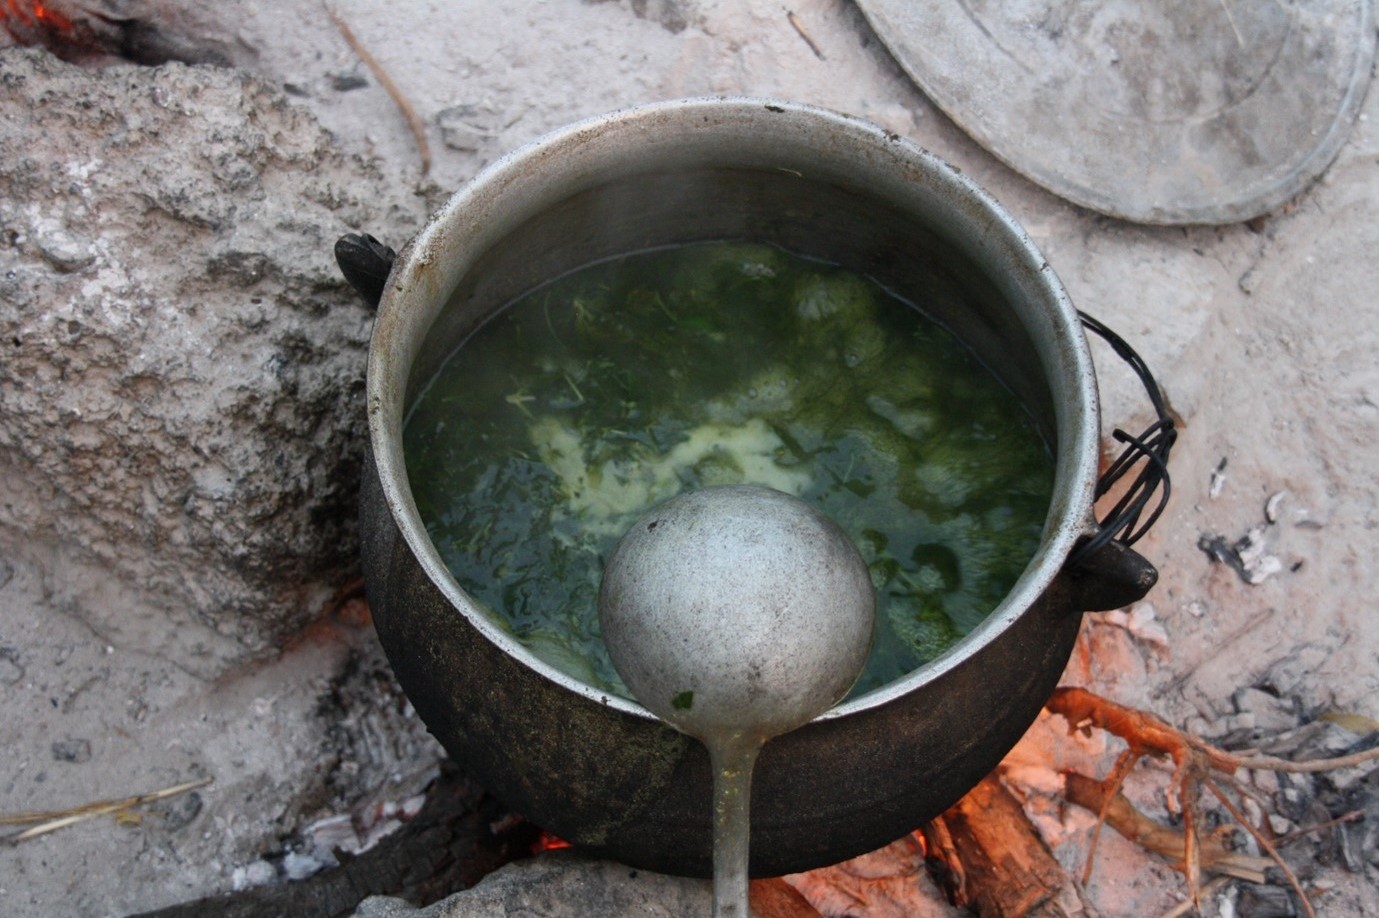 Image of a ‘slimy’ or mucilaginous sauce made with plant leaves